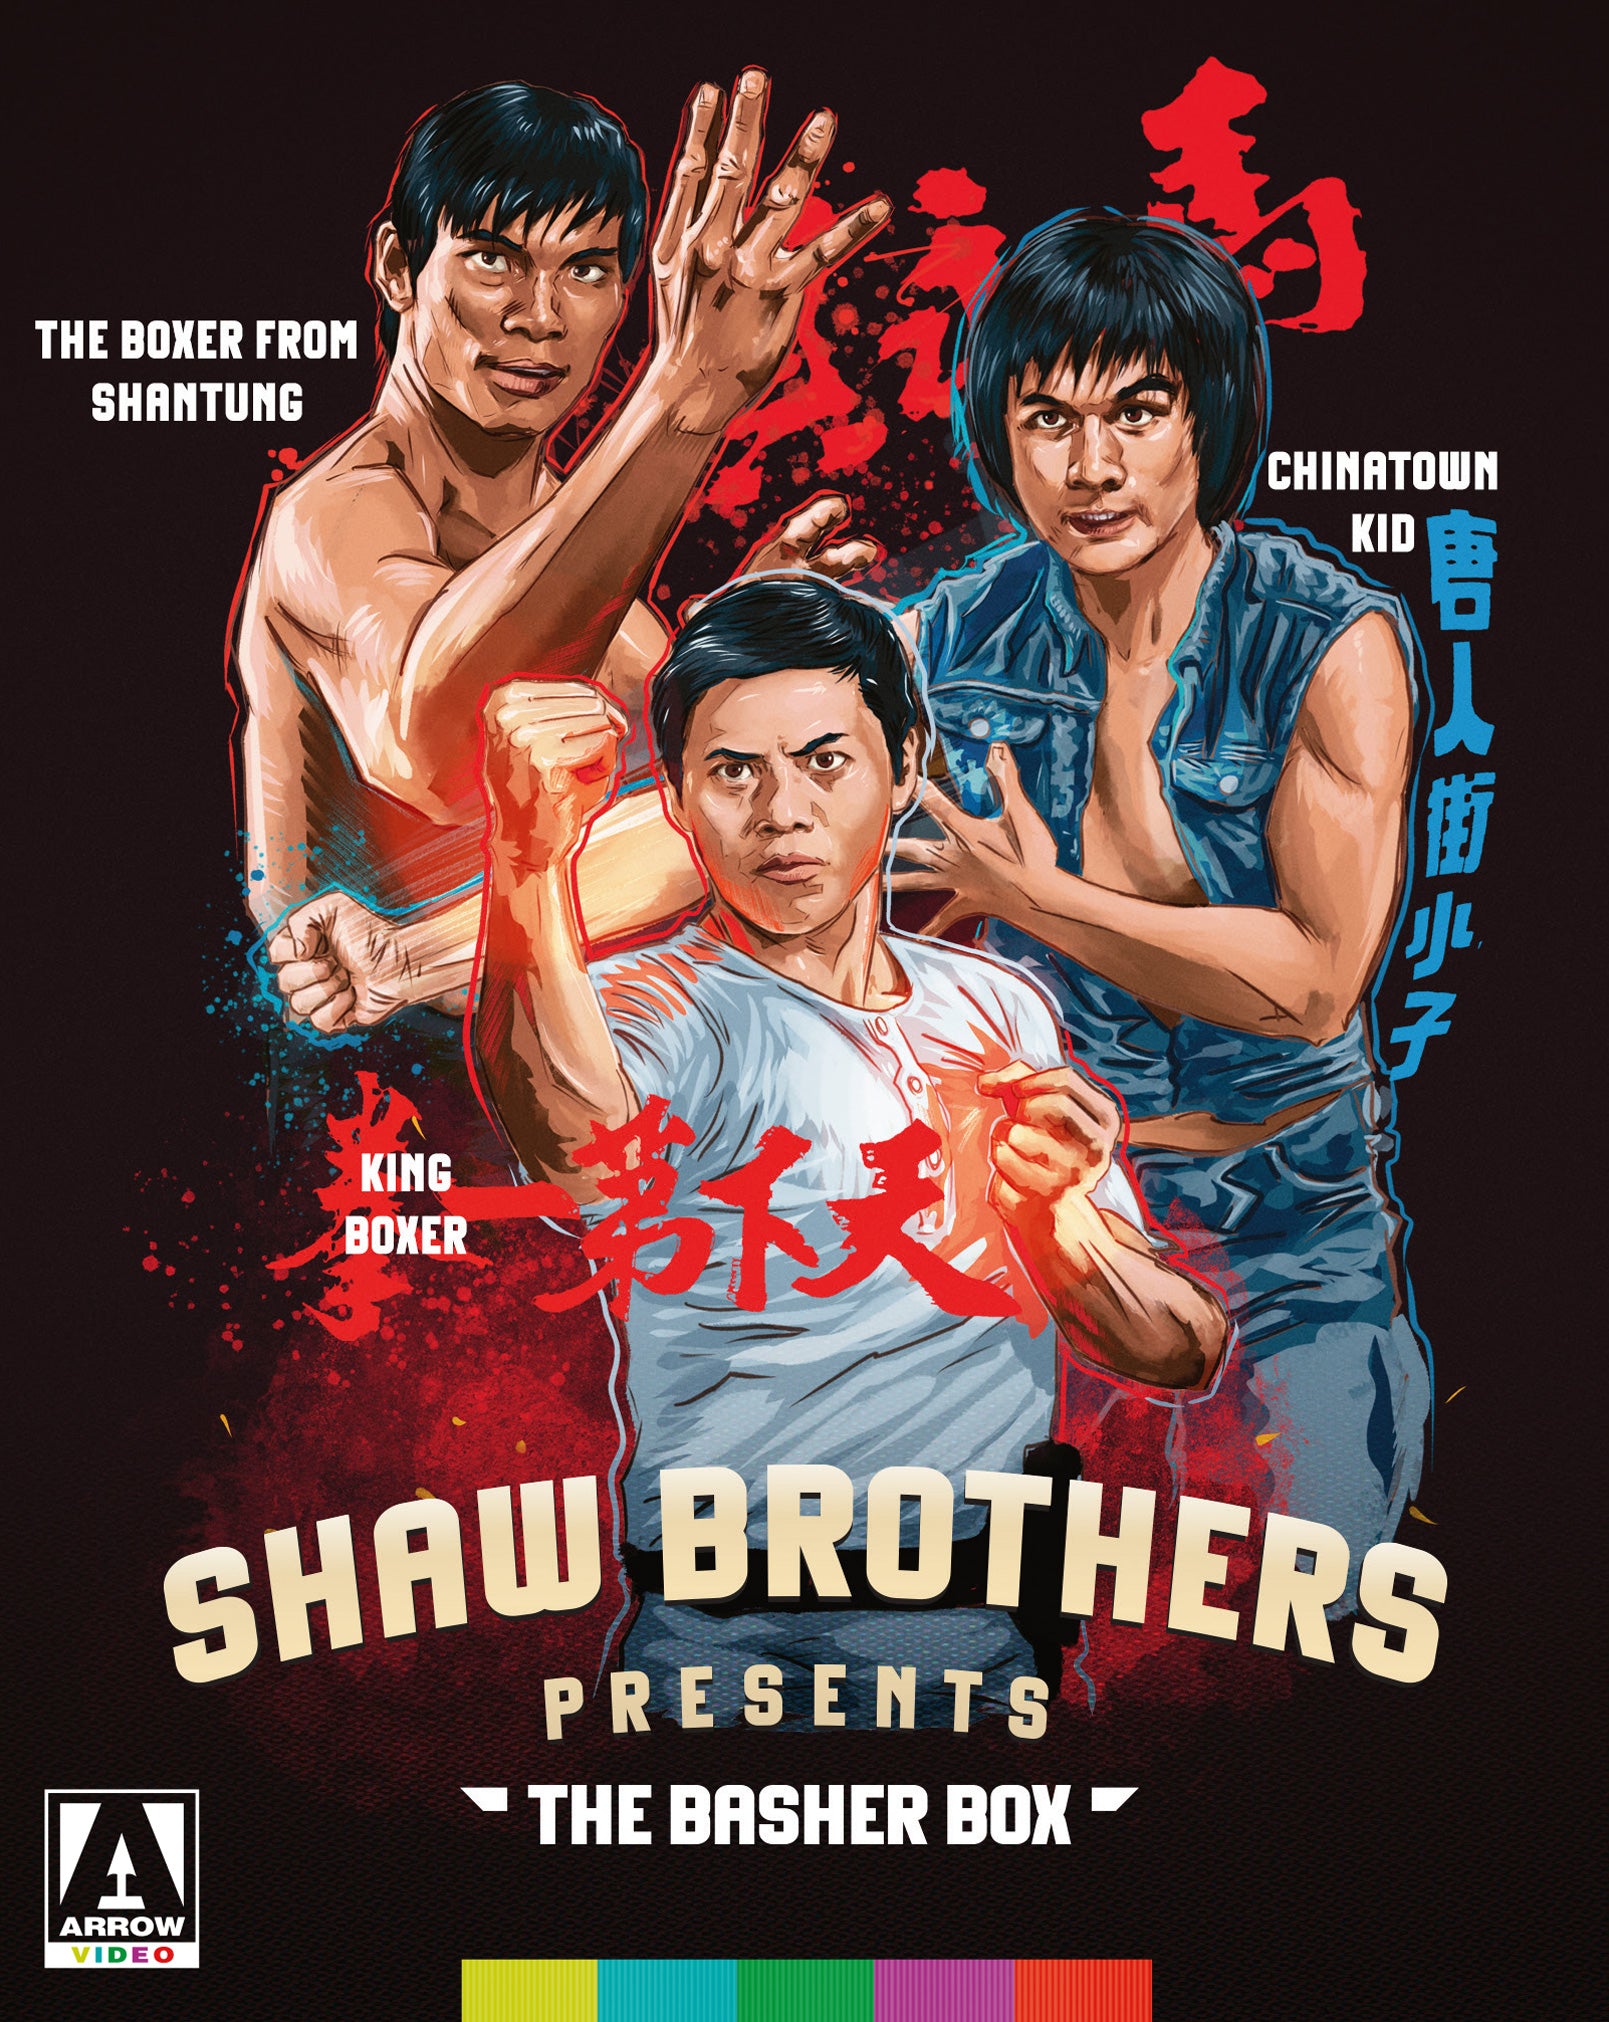 SHAW BROTHERS PRESENTS: THE BASHER BOX BLU-RAY